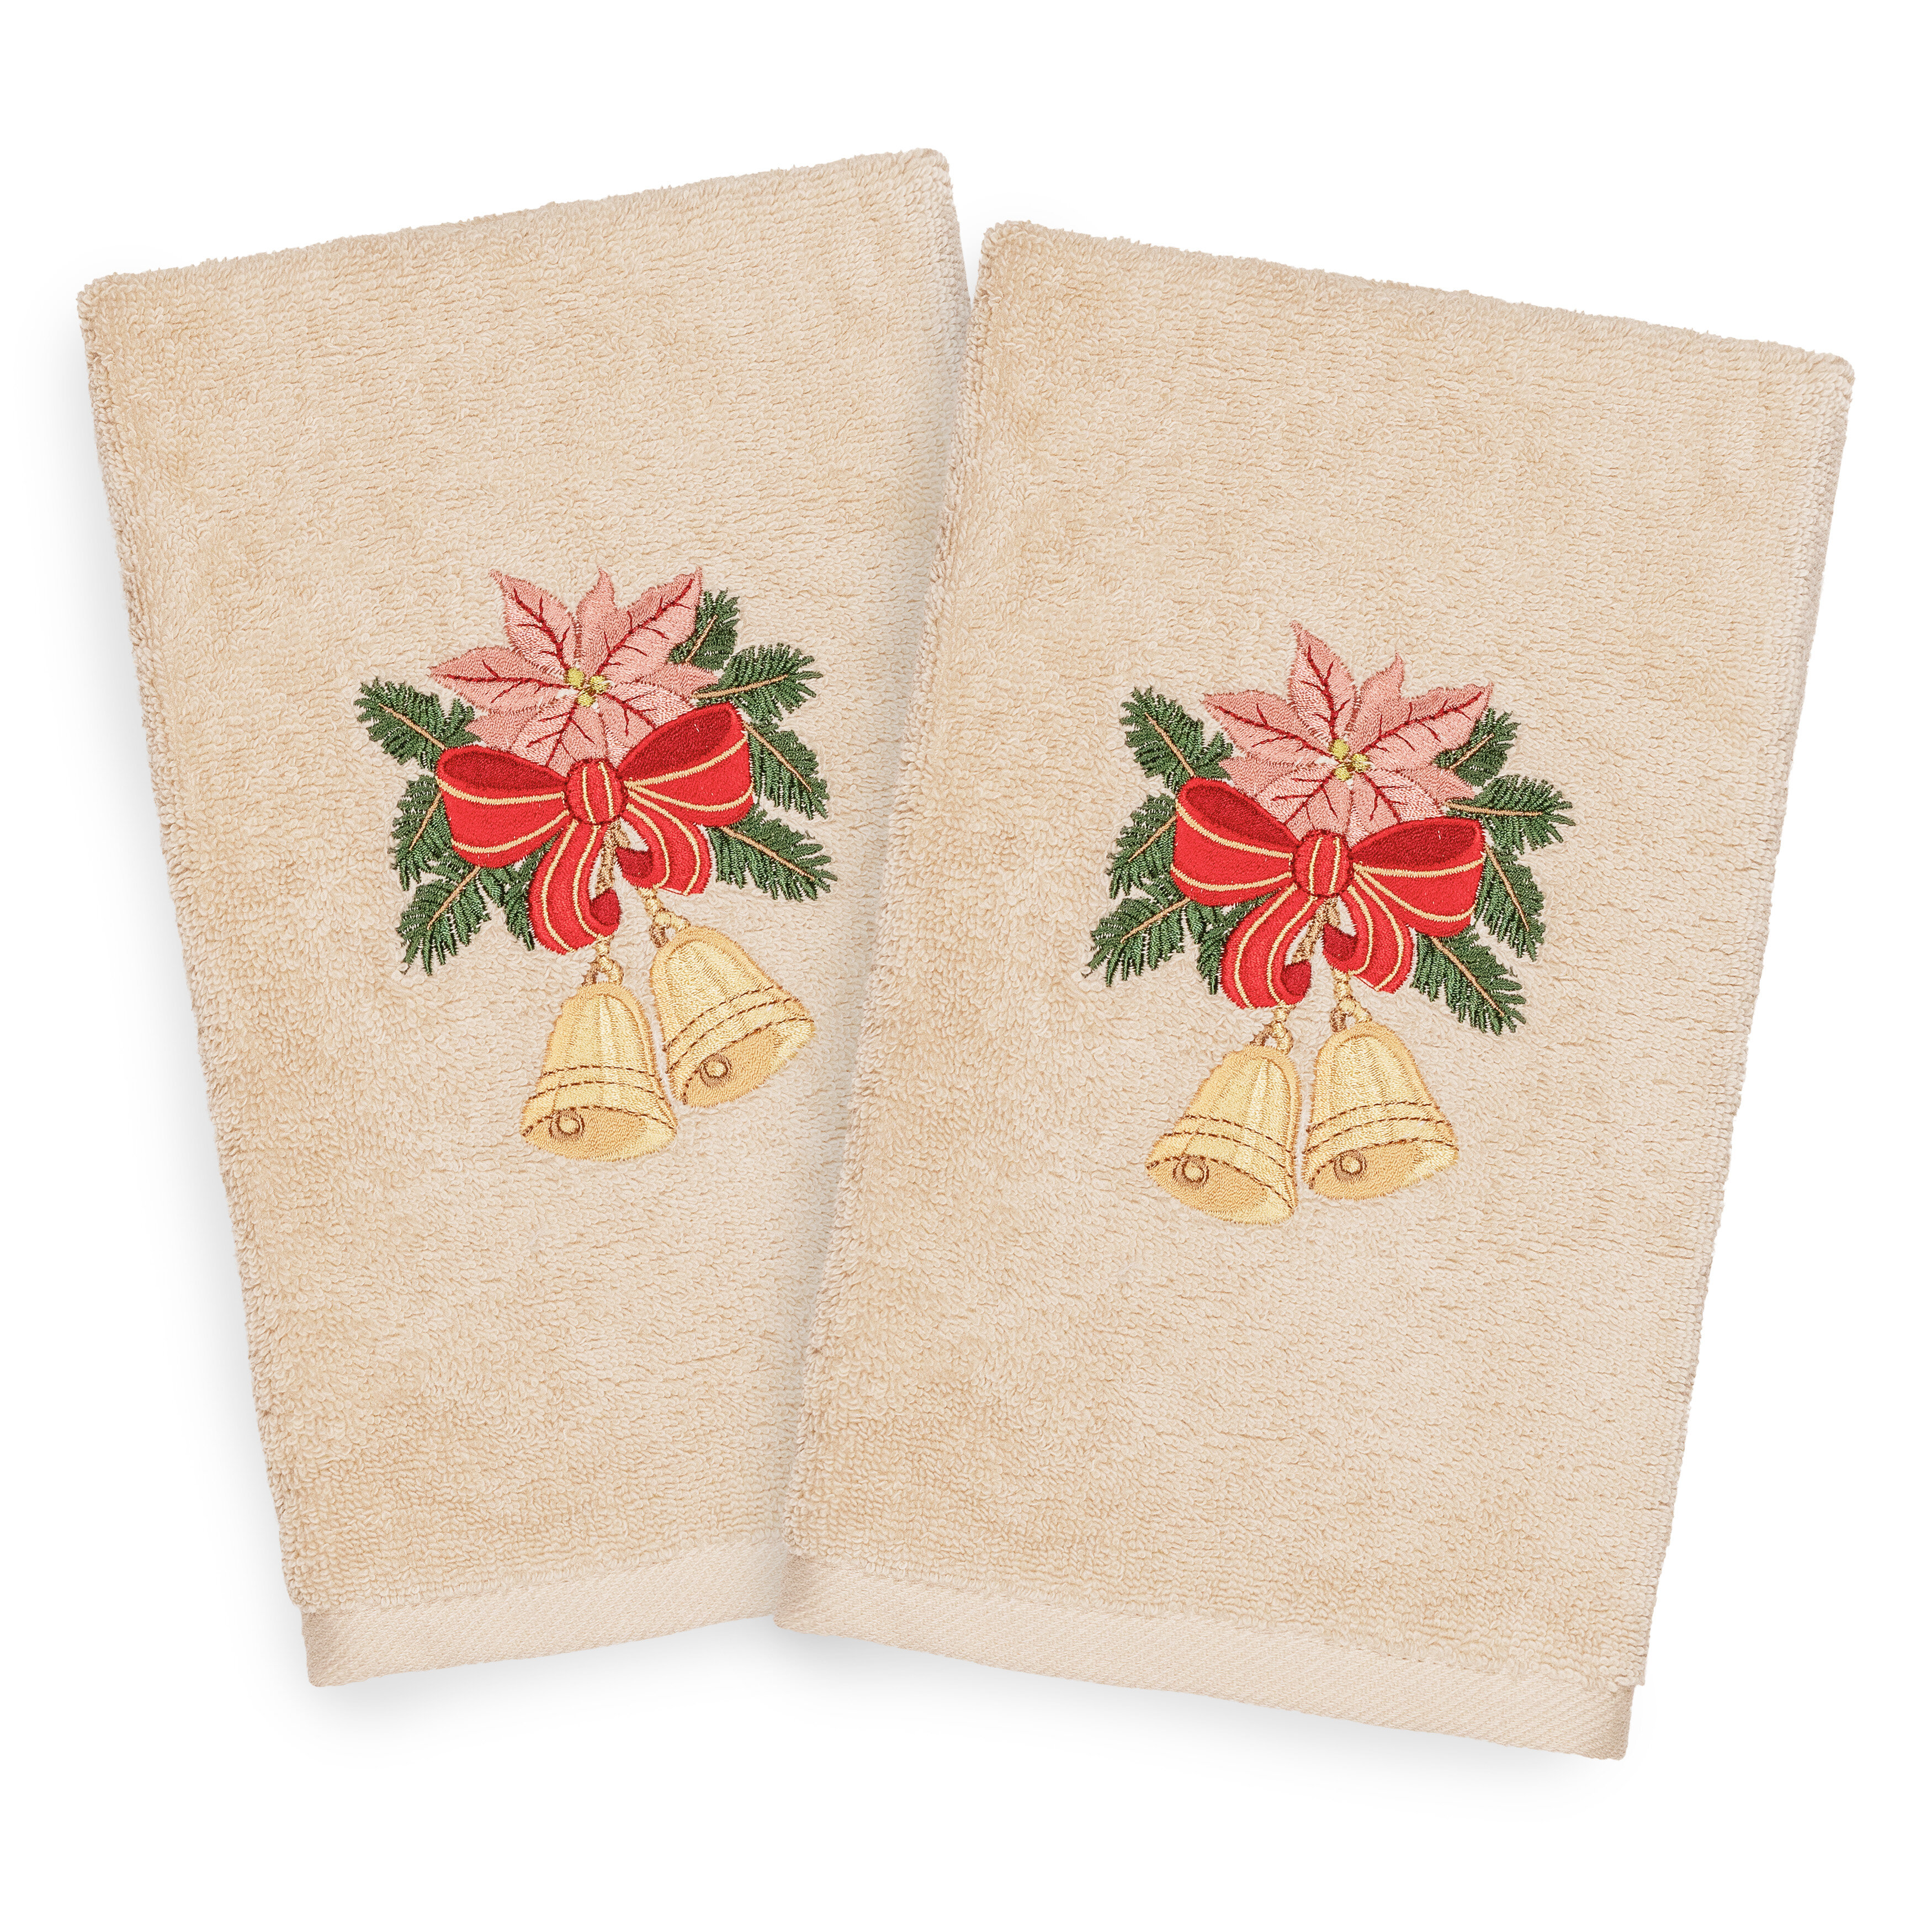 New Turkish Towel Kitchen Set of 2 Cotton Terry Holiday Towels Red  Poinsettia